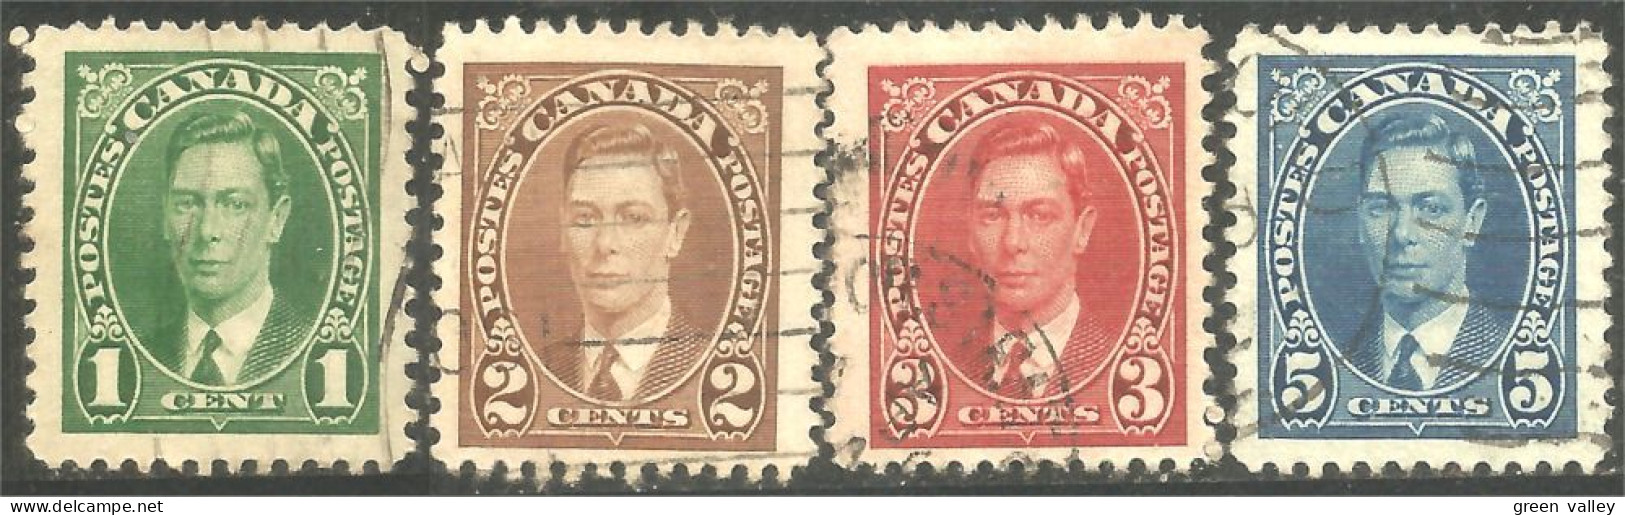 951 Canada 1937 King Roi George VI Mufti Issue 4 Timbres Stamps (484f) - Königshäuser, Adel